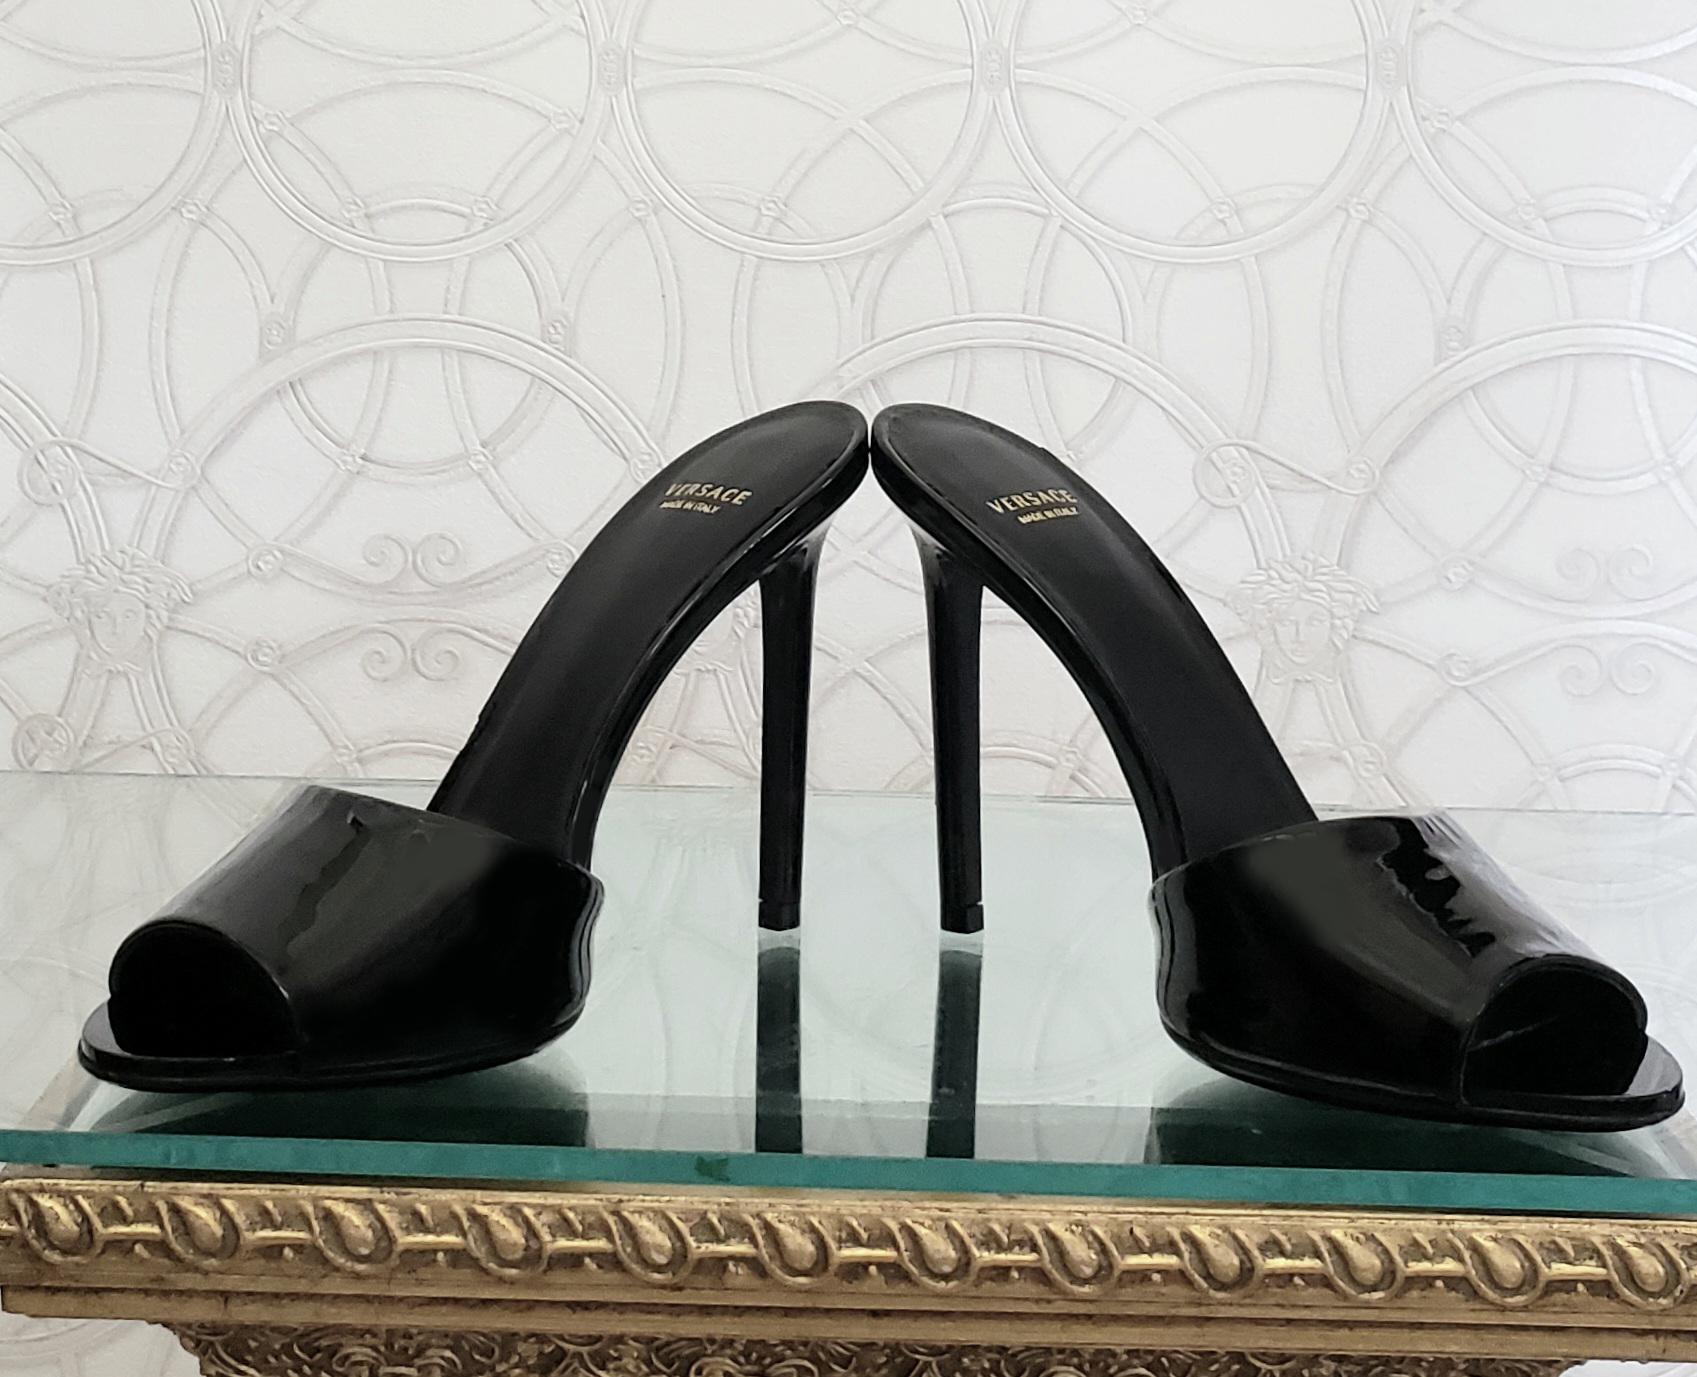 Black Resort 2016 NEW VERSACE BLACK PATENT LEATHER MULE SANDALS SHOES 37 - 7 For Sale